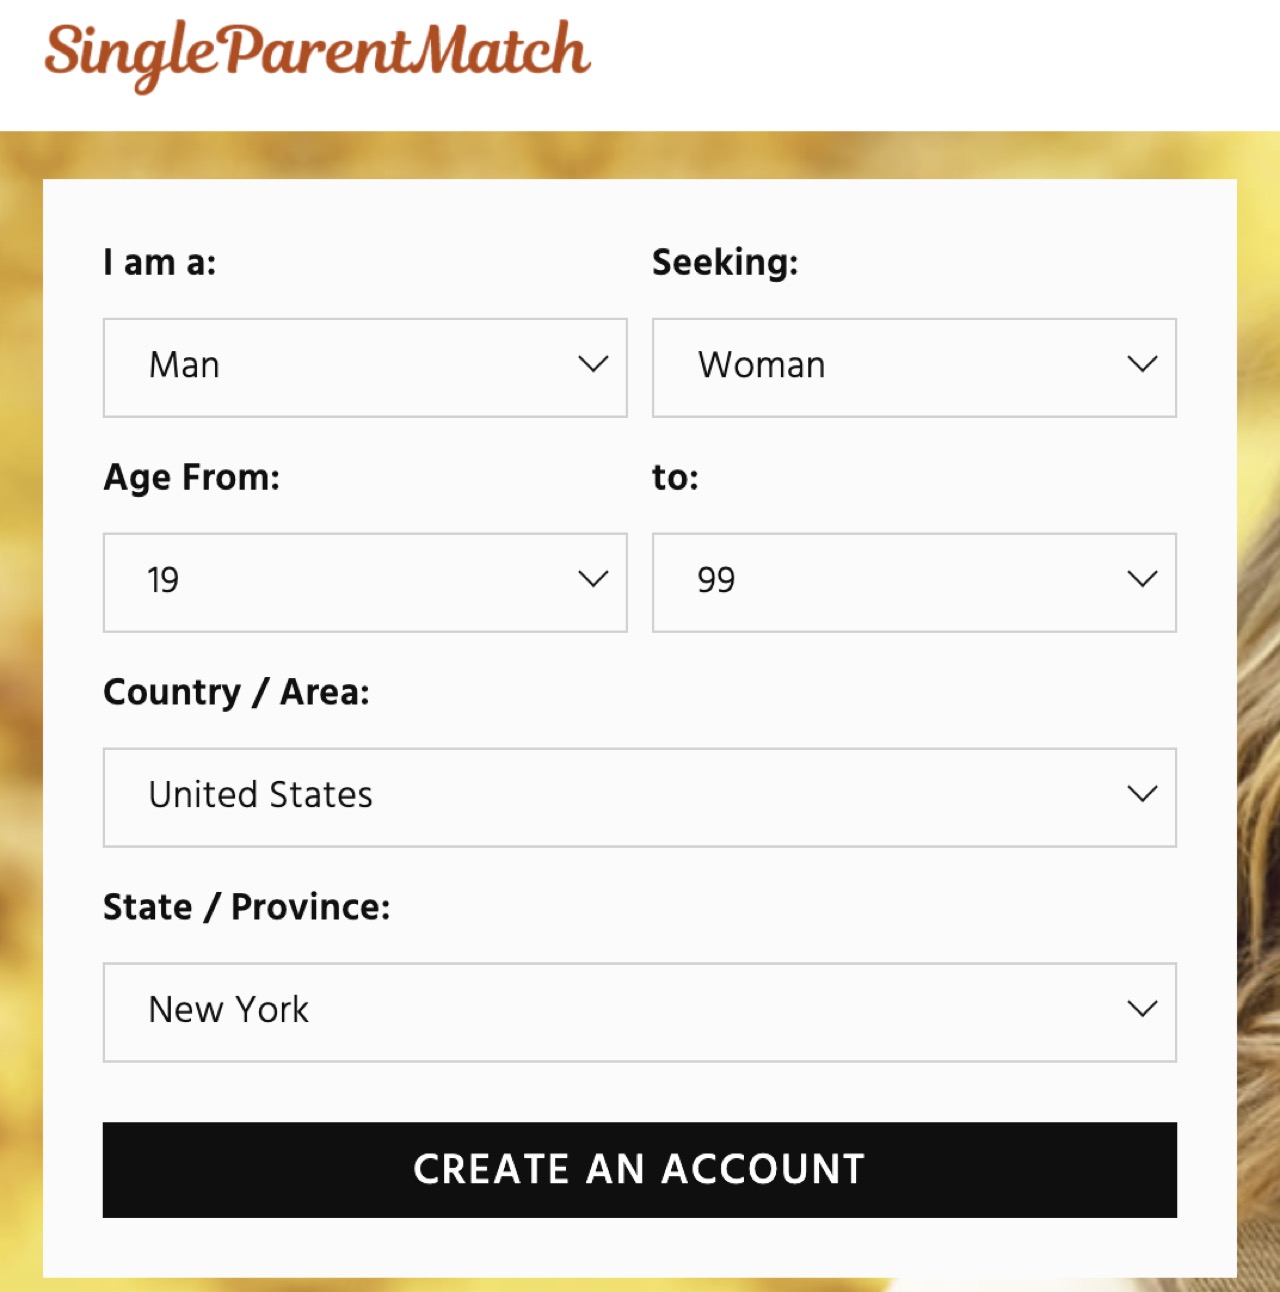 singleparentmatch-review-signup-1